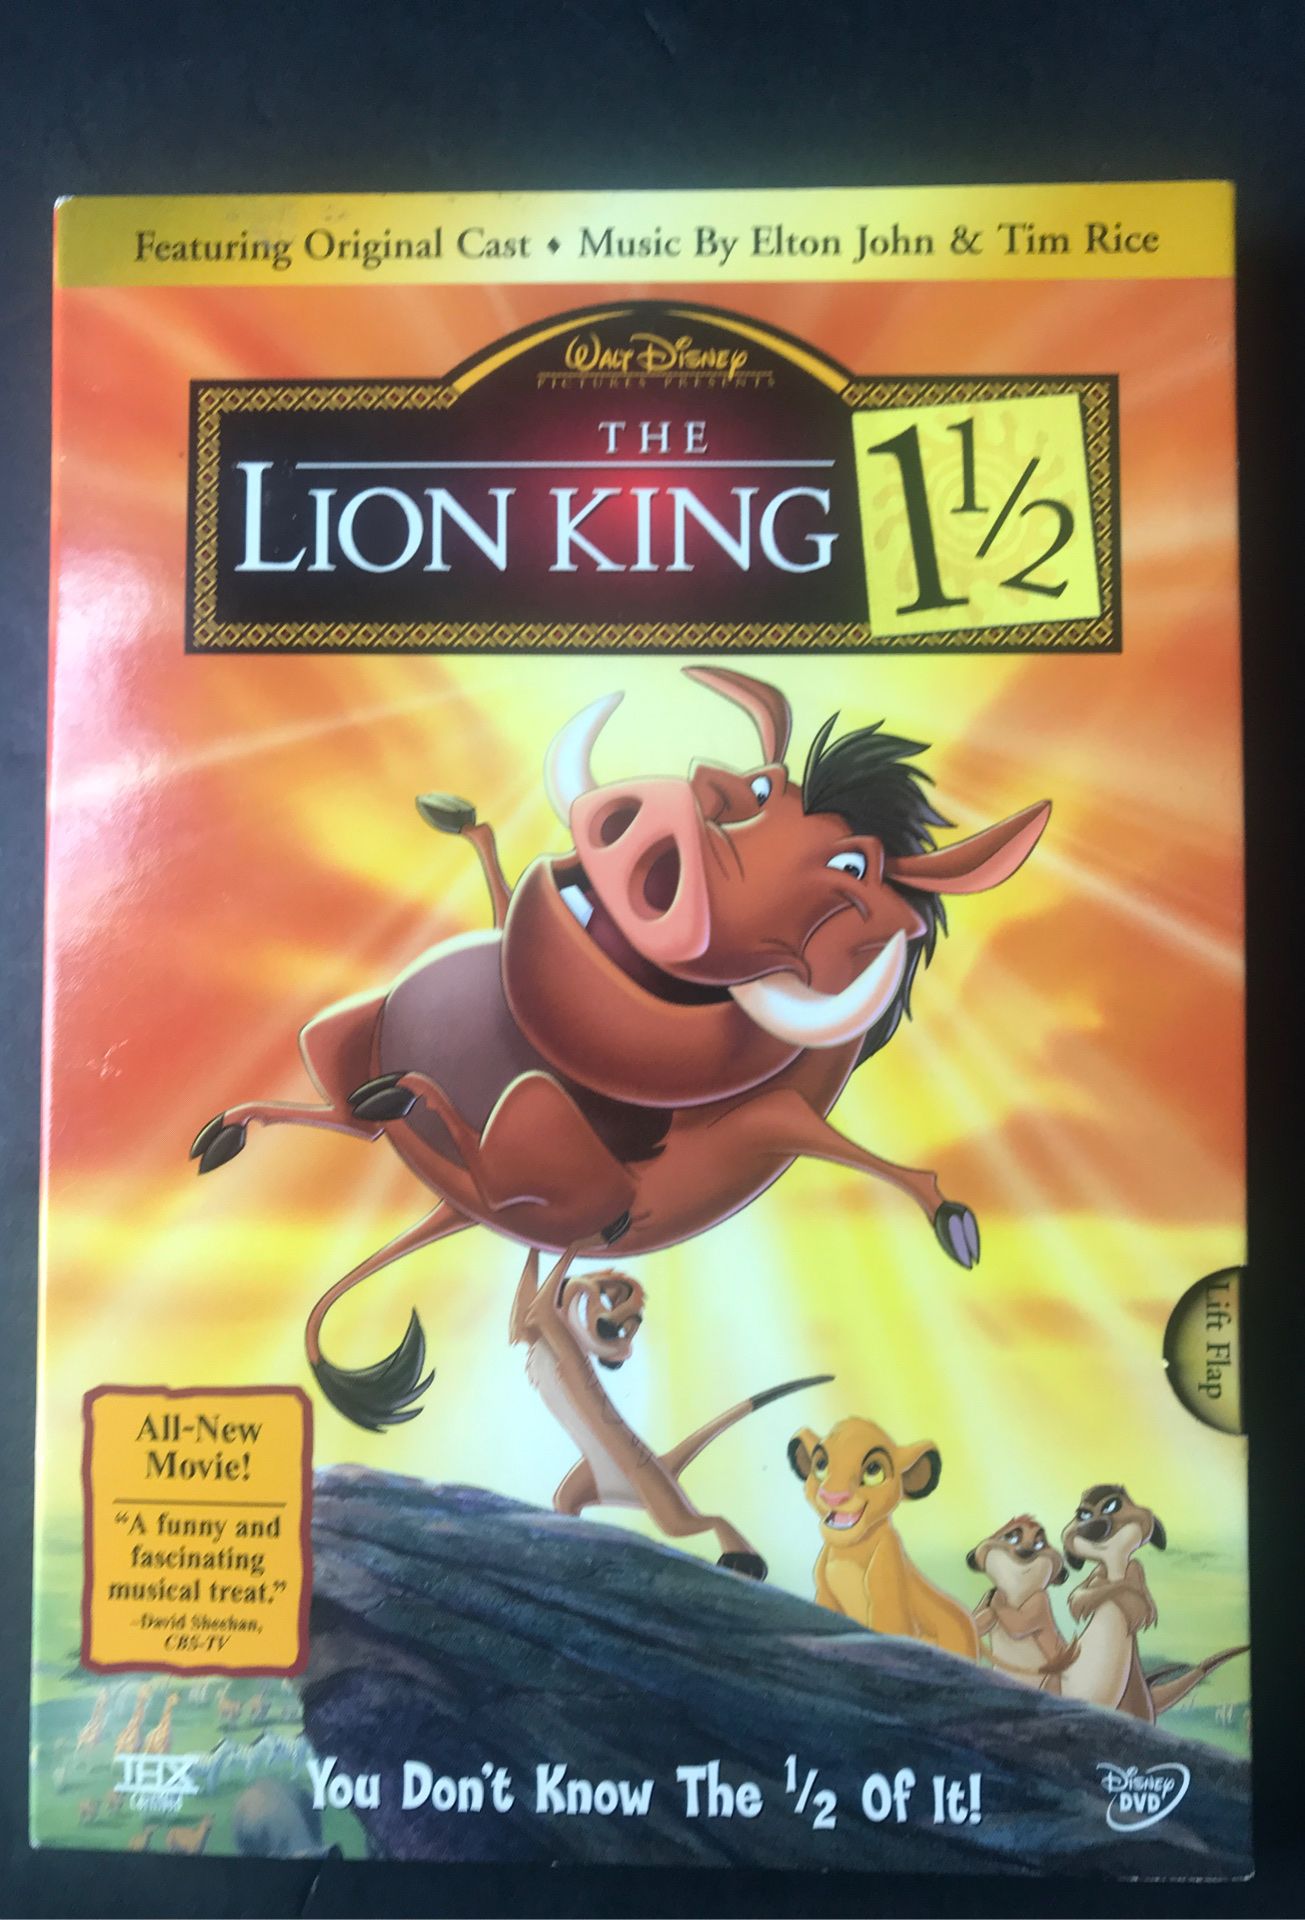 The Lion King 1 1/2 DVD